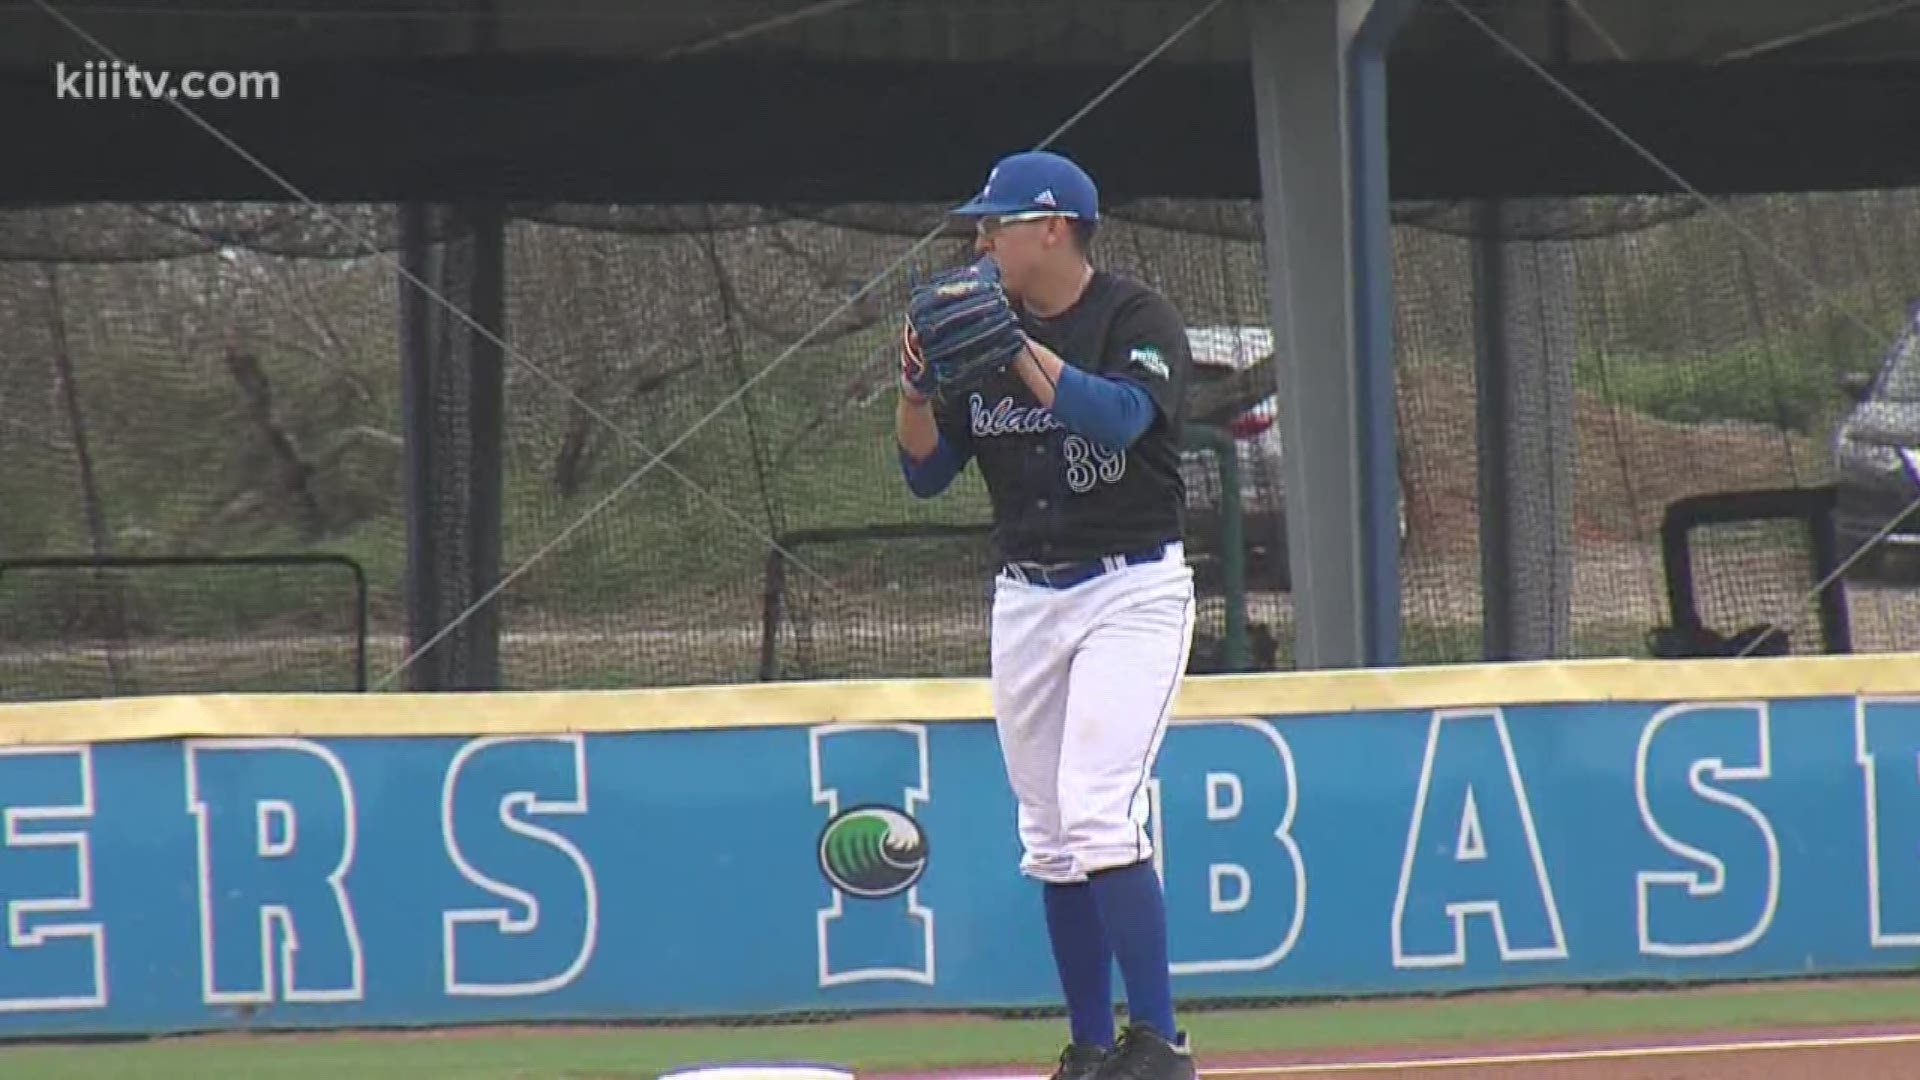 Texas A&M-Corpus Christi baseball picked up another win over Ohio State 3-2.